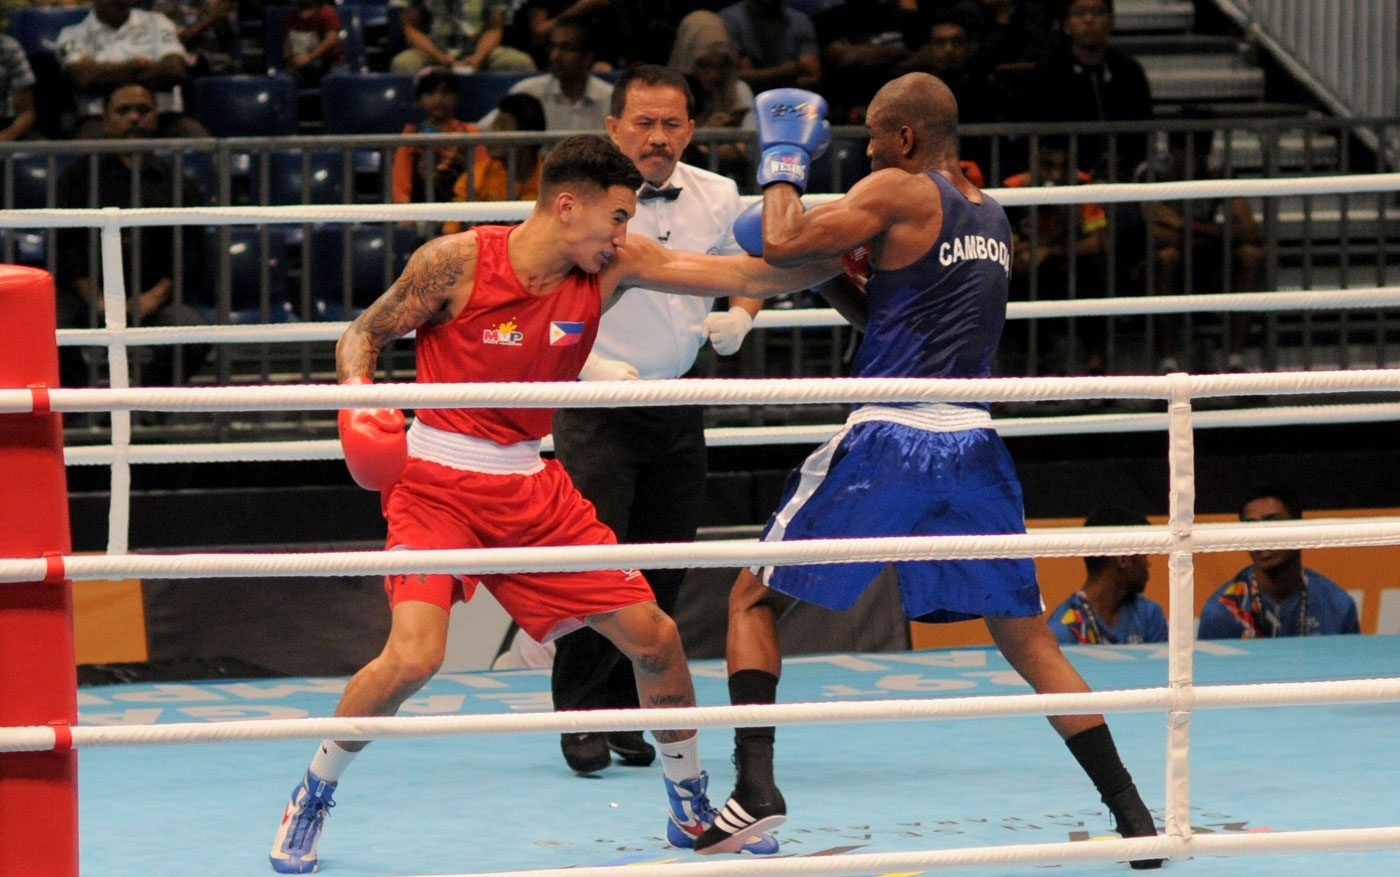 John Marvin not worried about facing hometown boxer in SEA Games final